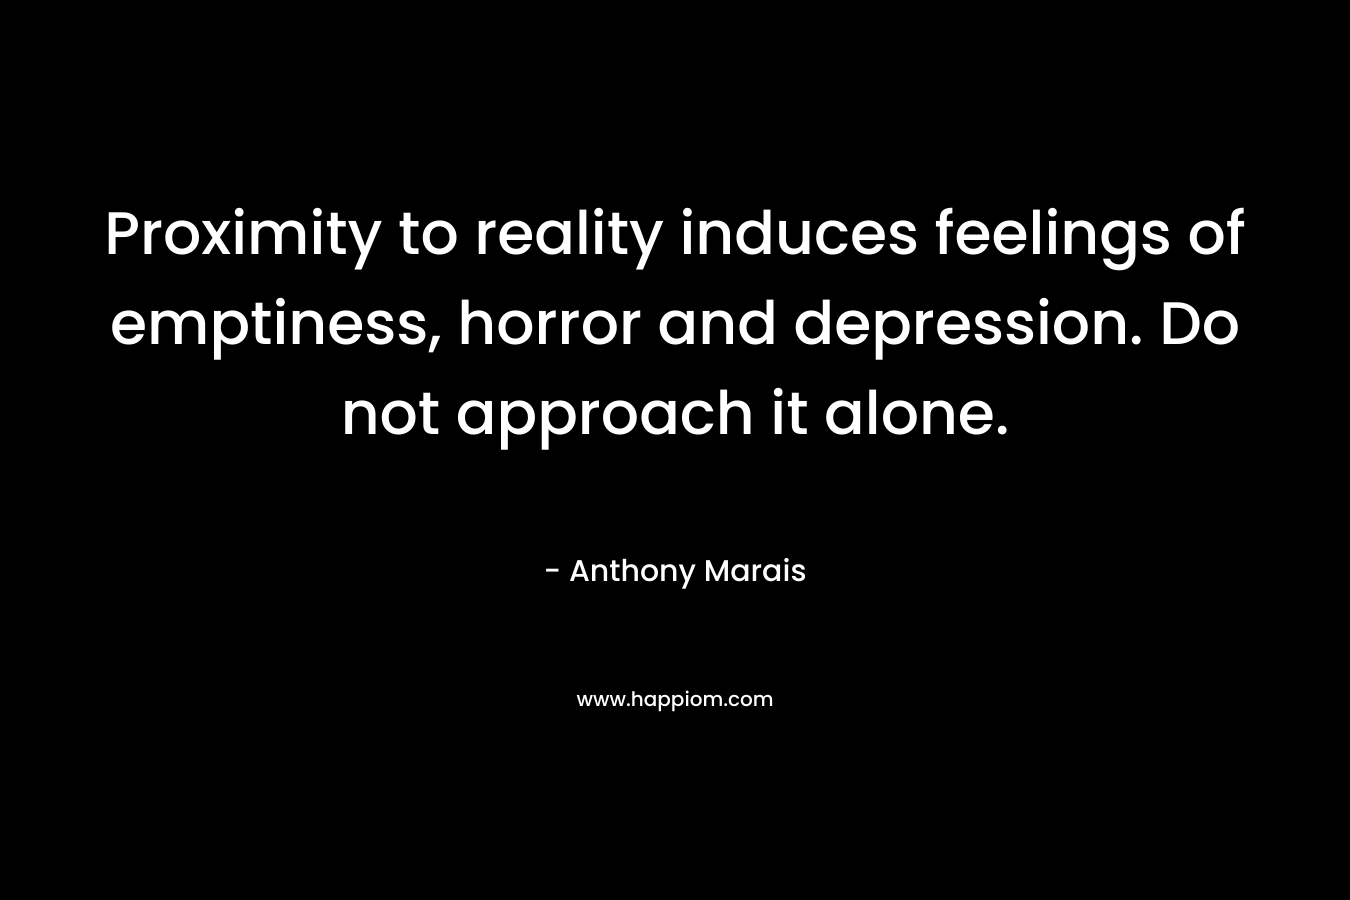 Proximity to reality induces feelings of emptiness, horror and depression. Do not approach it alone.